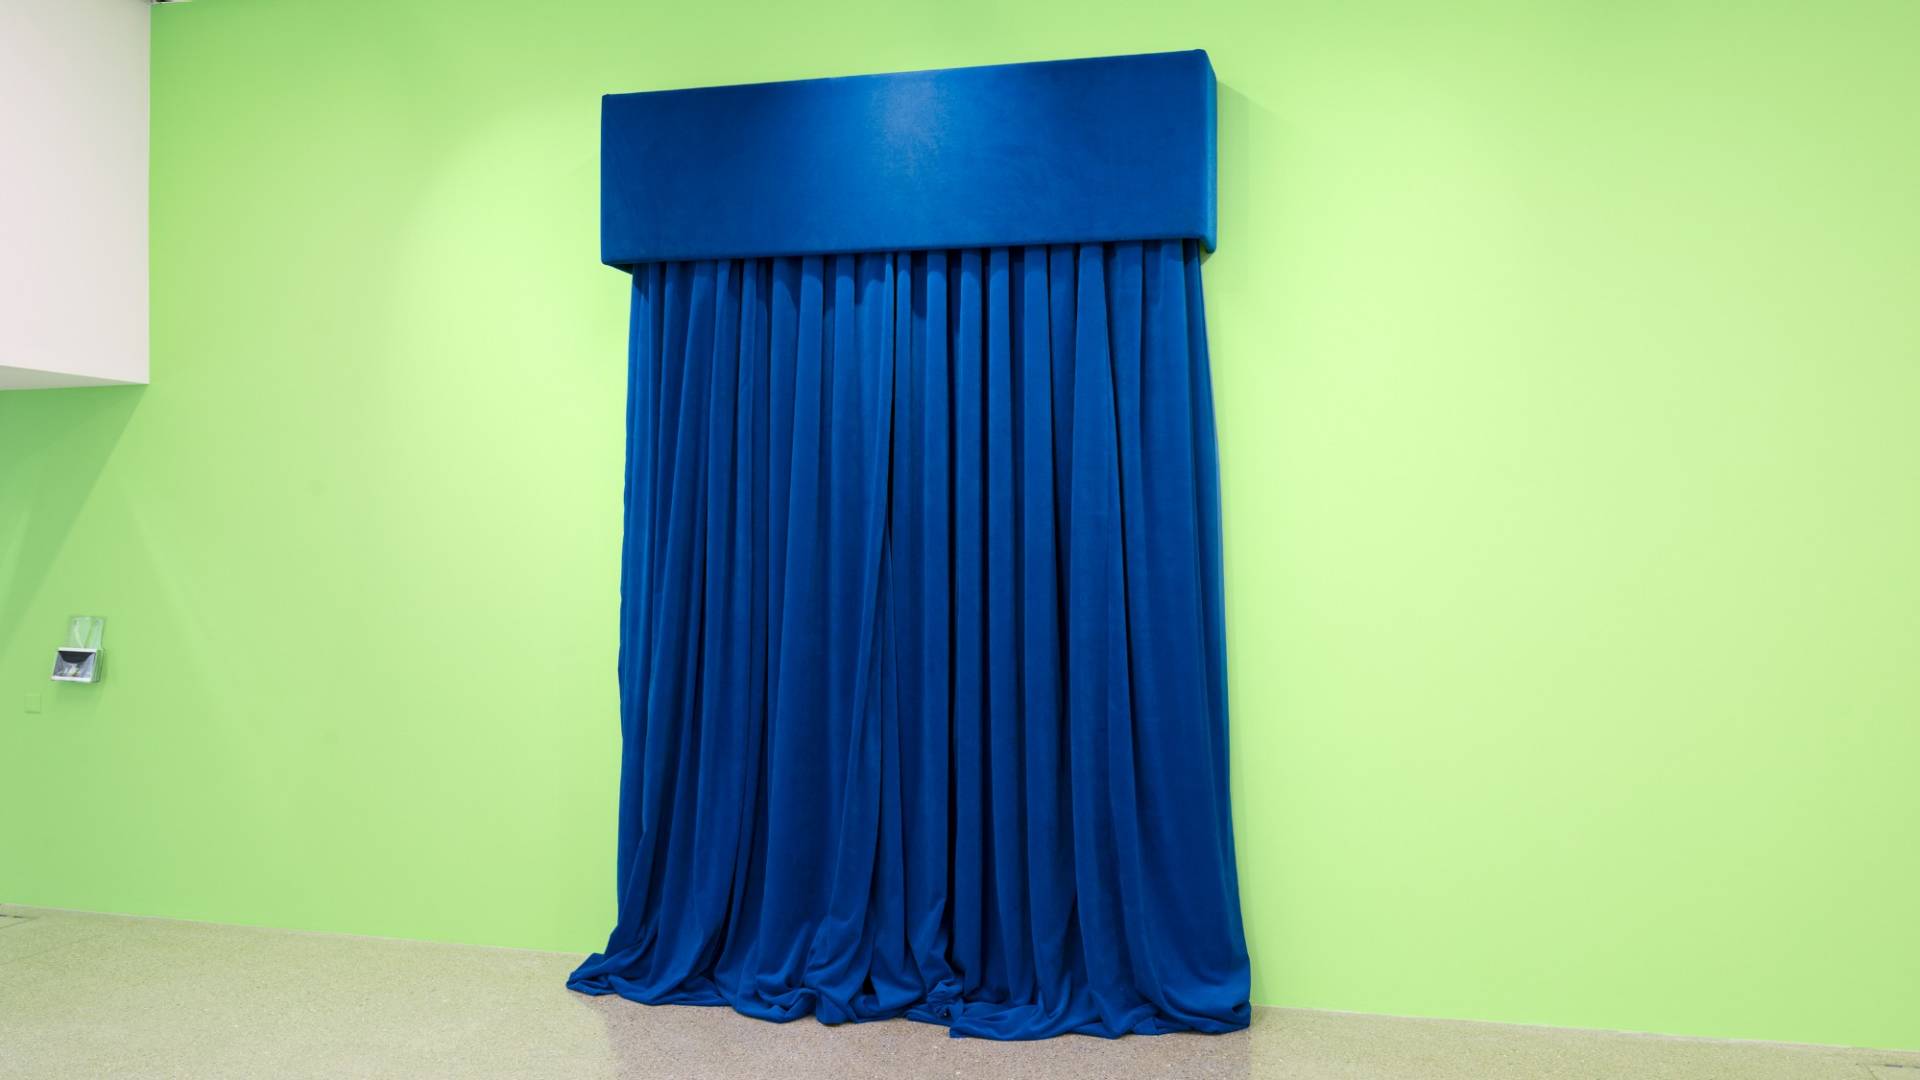 Blue, heavy looking velvet curtain in front of a green painted wall.